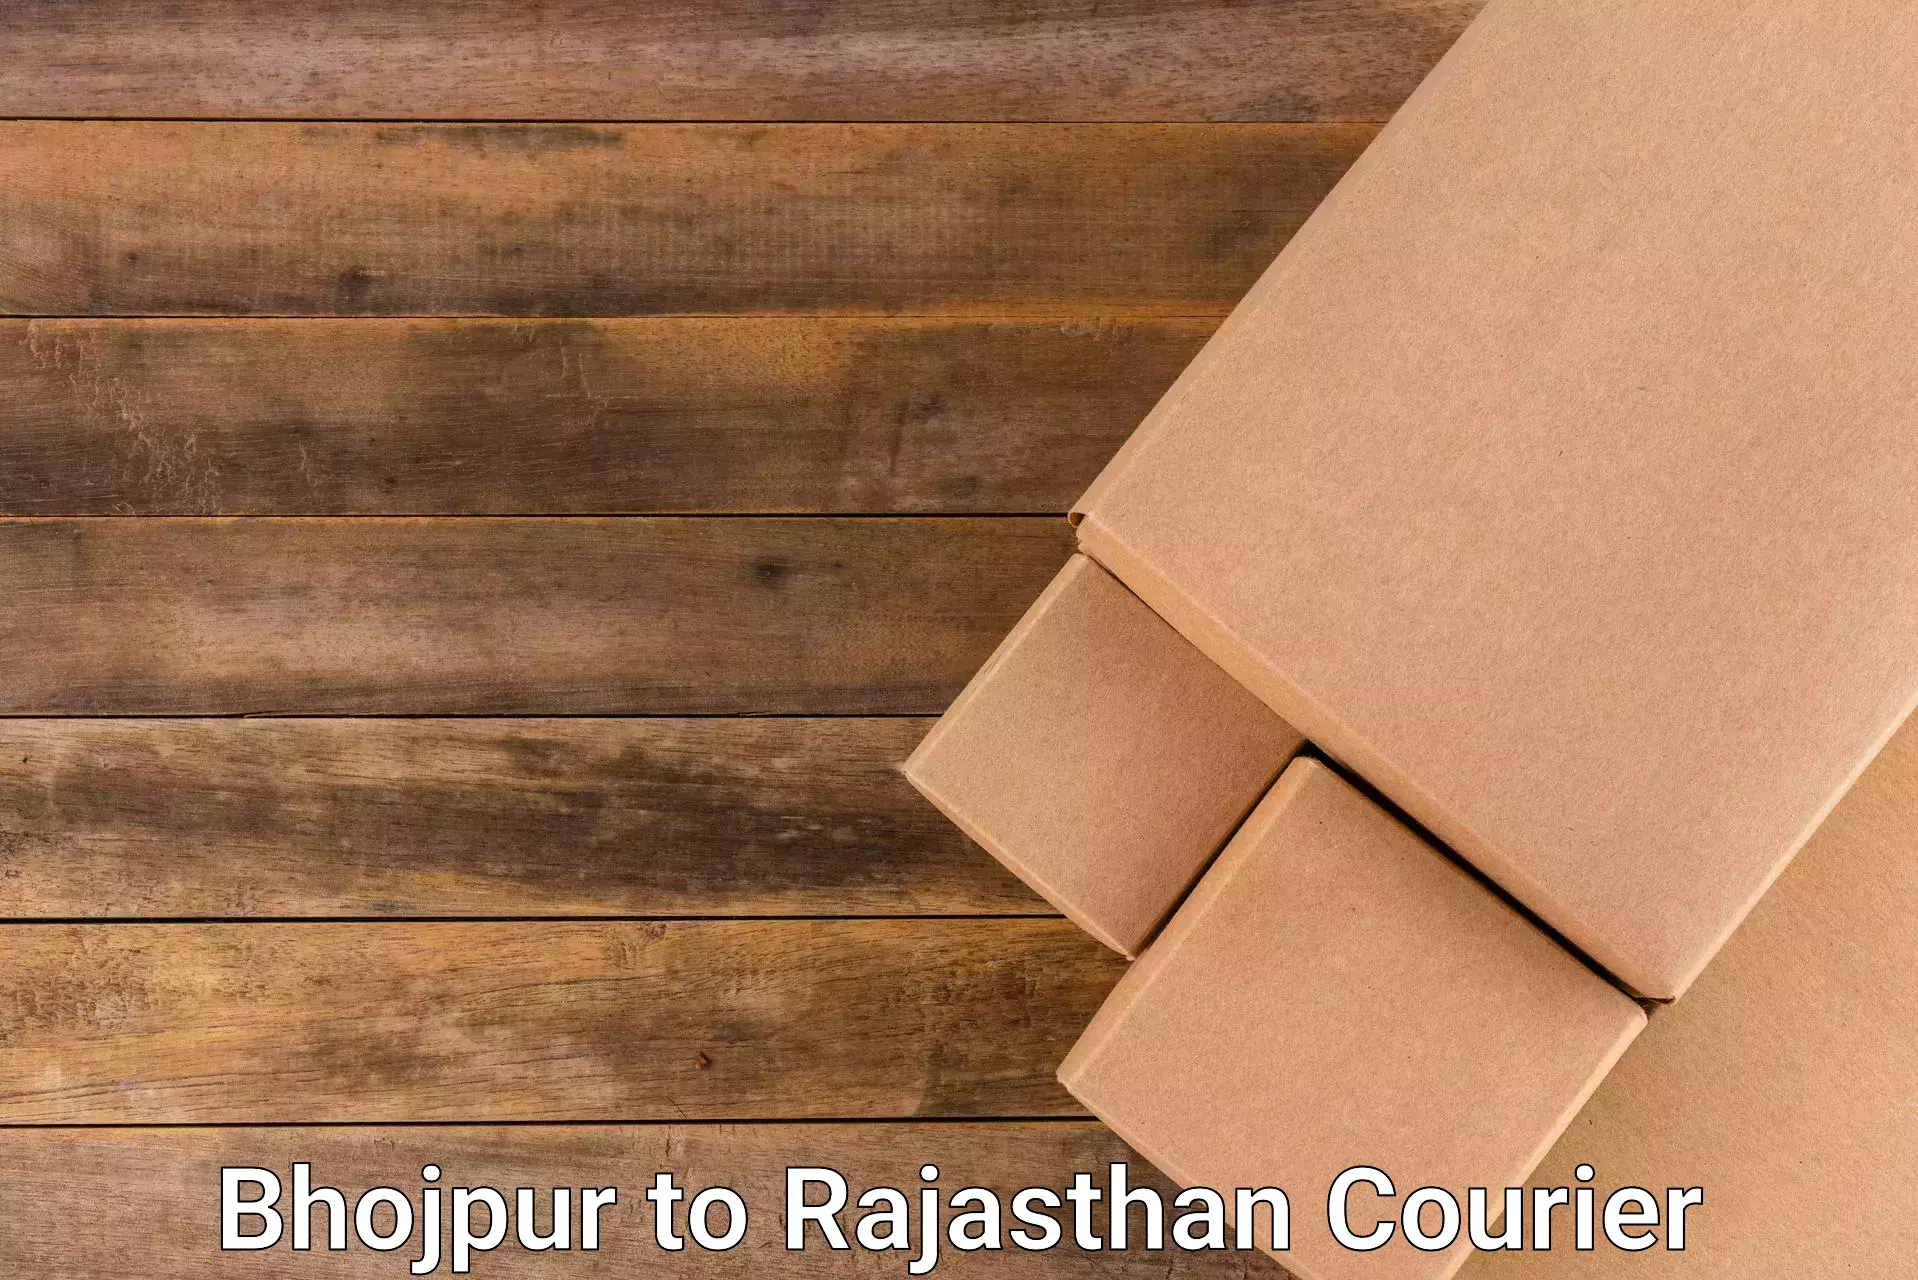 Global shipping networks Bhojpur to Nasirabad